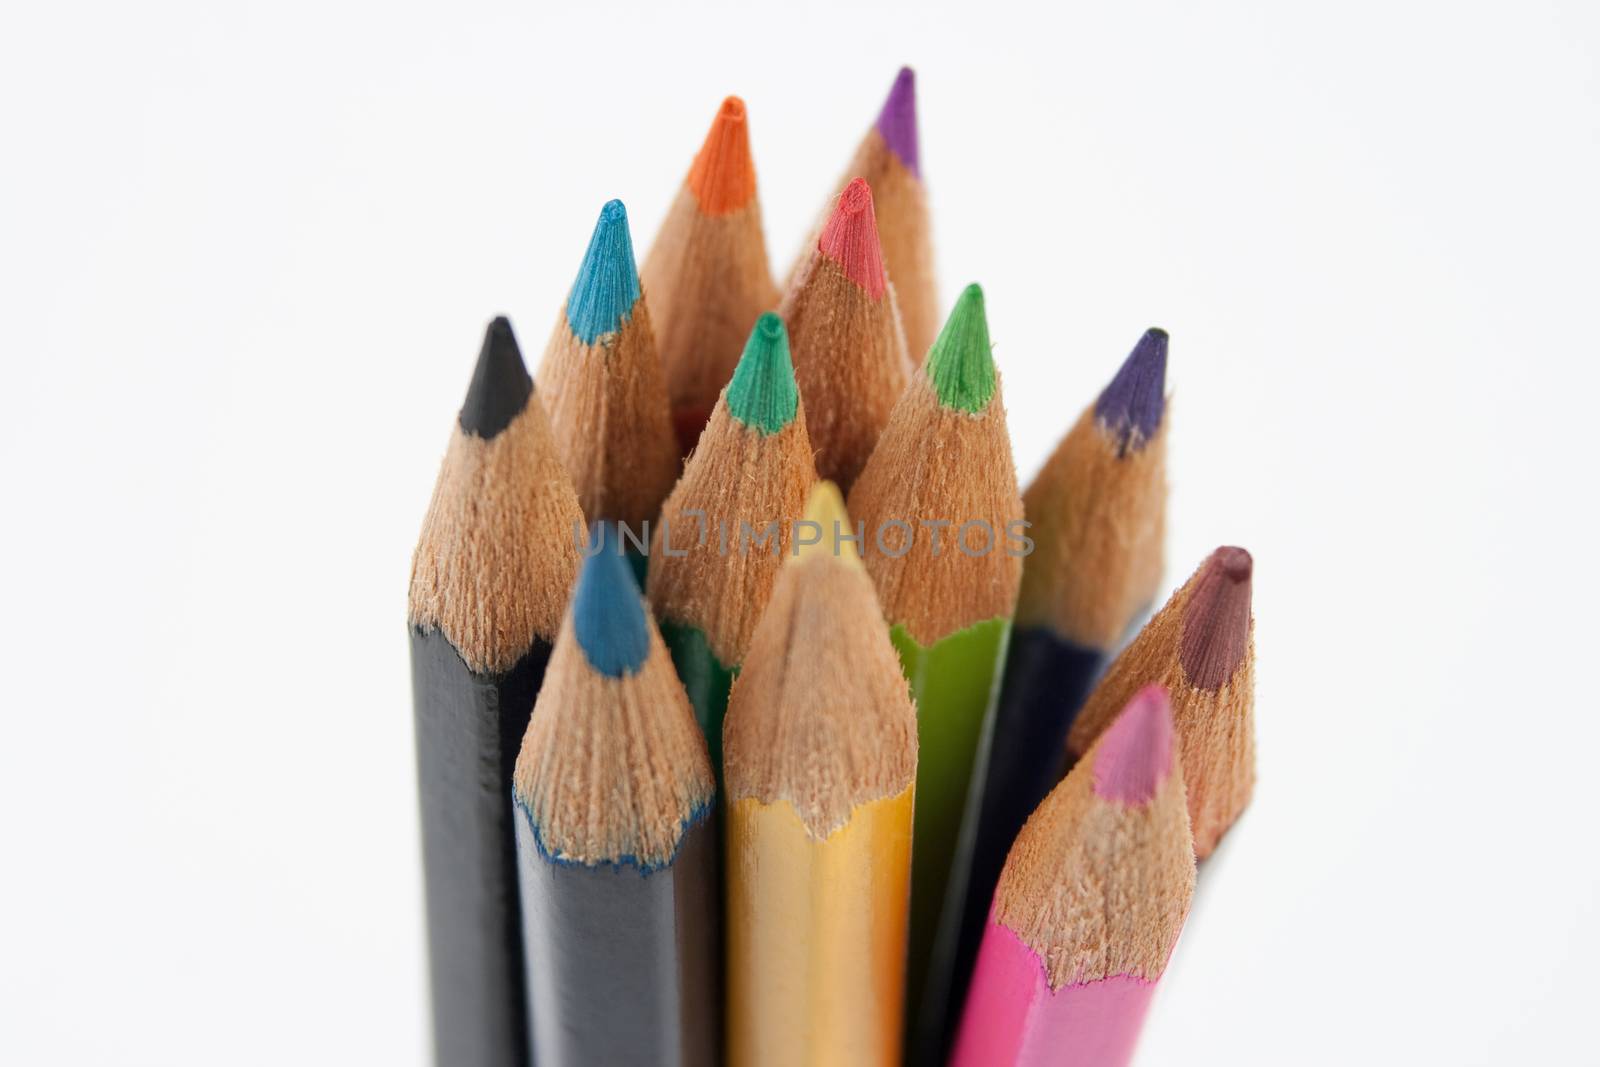 colored pencils standing upwords on white background
